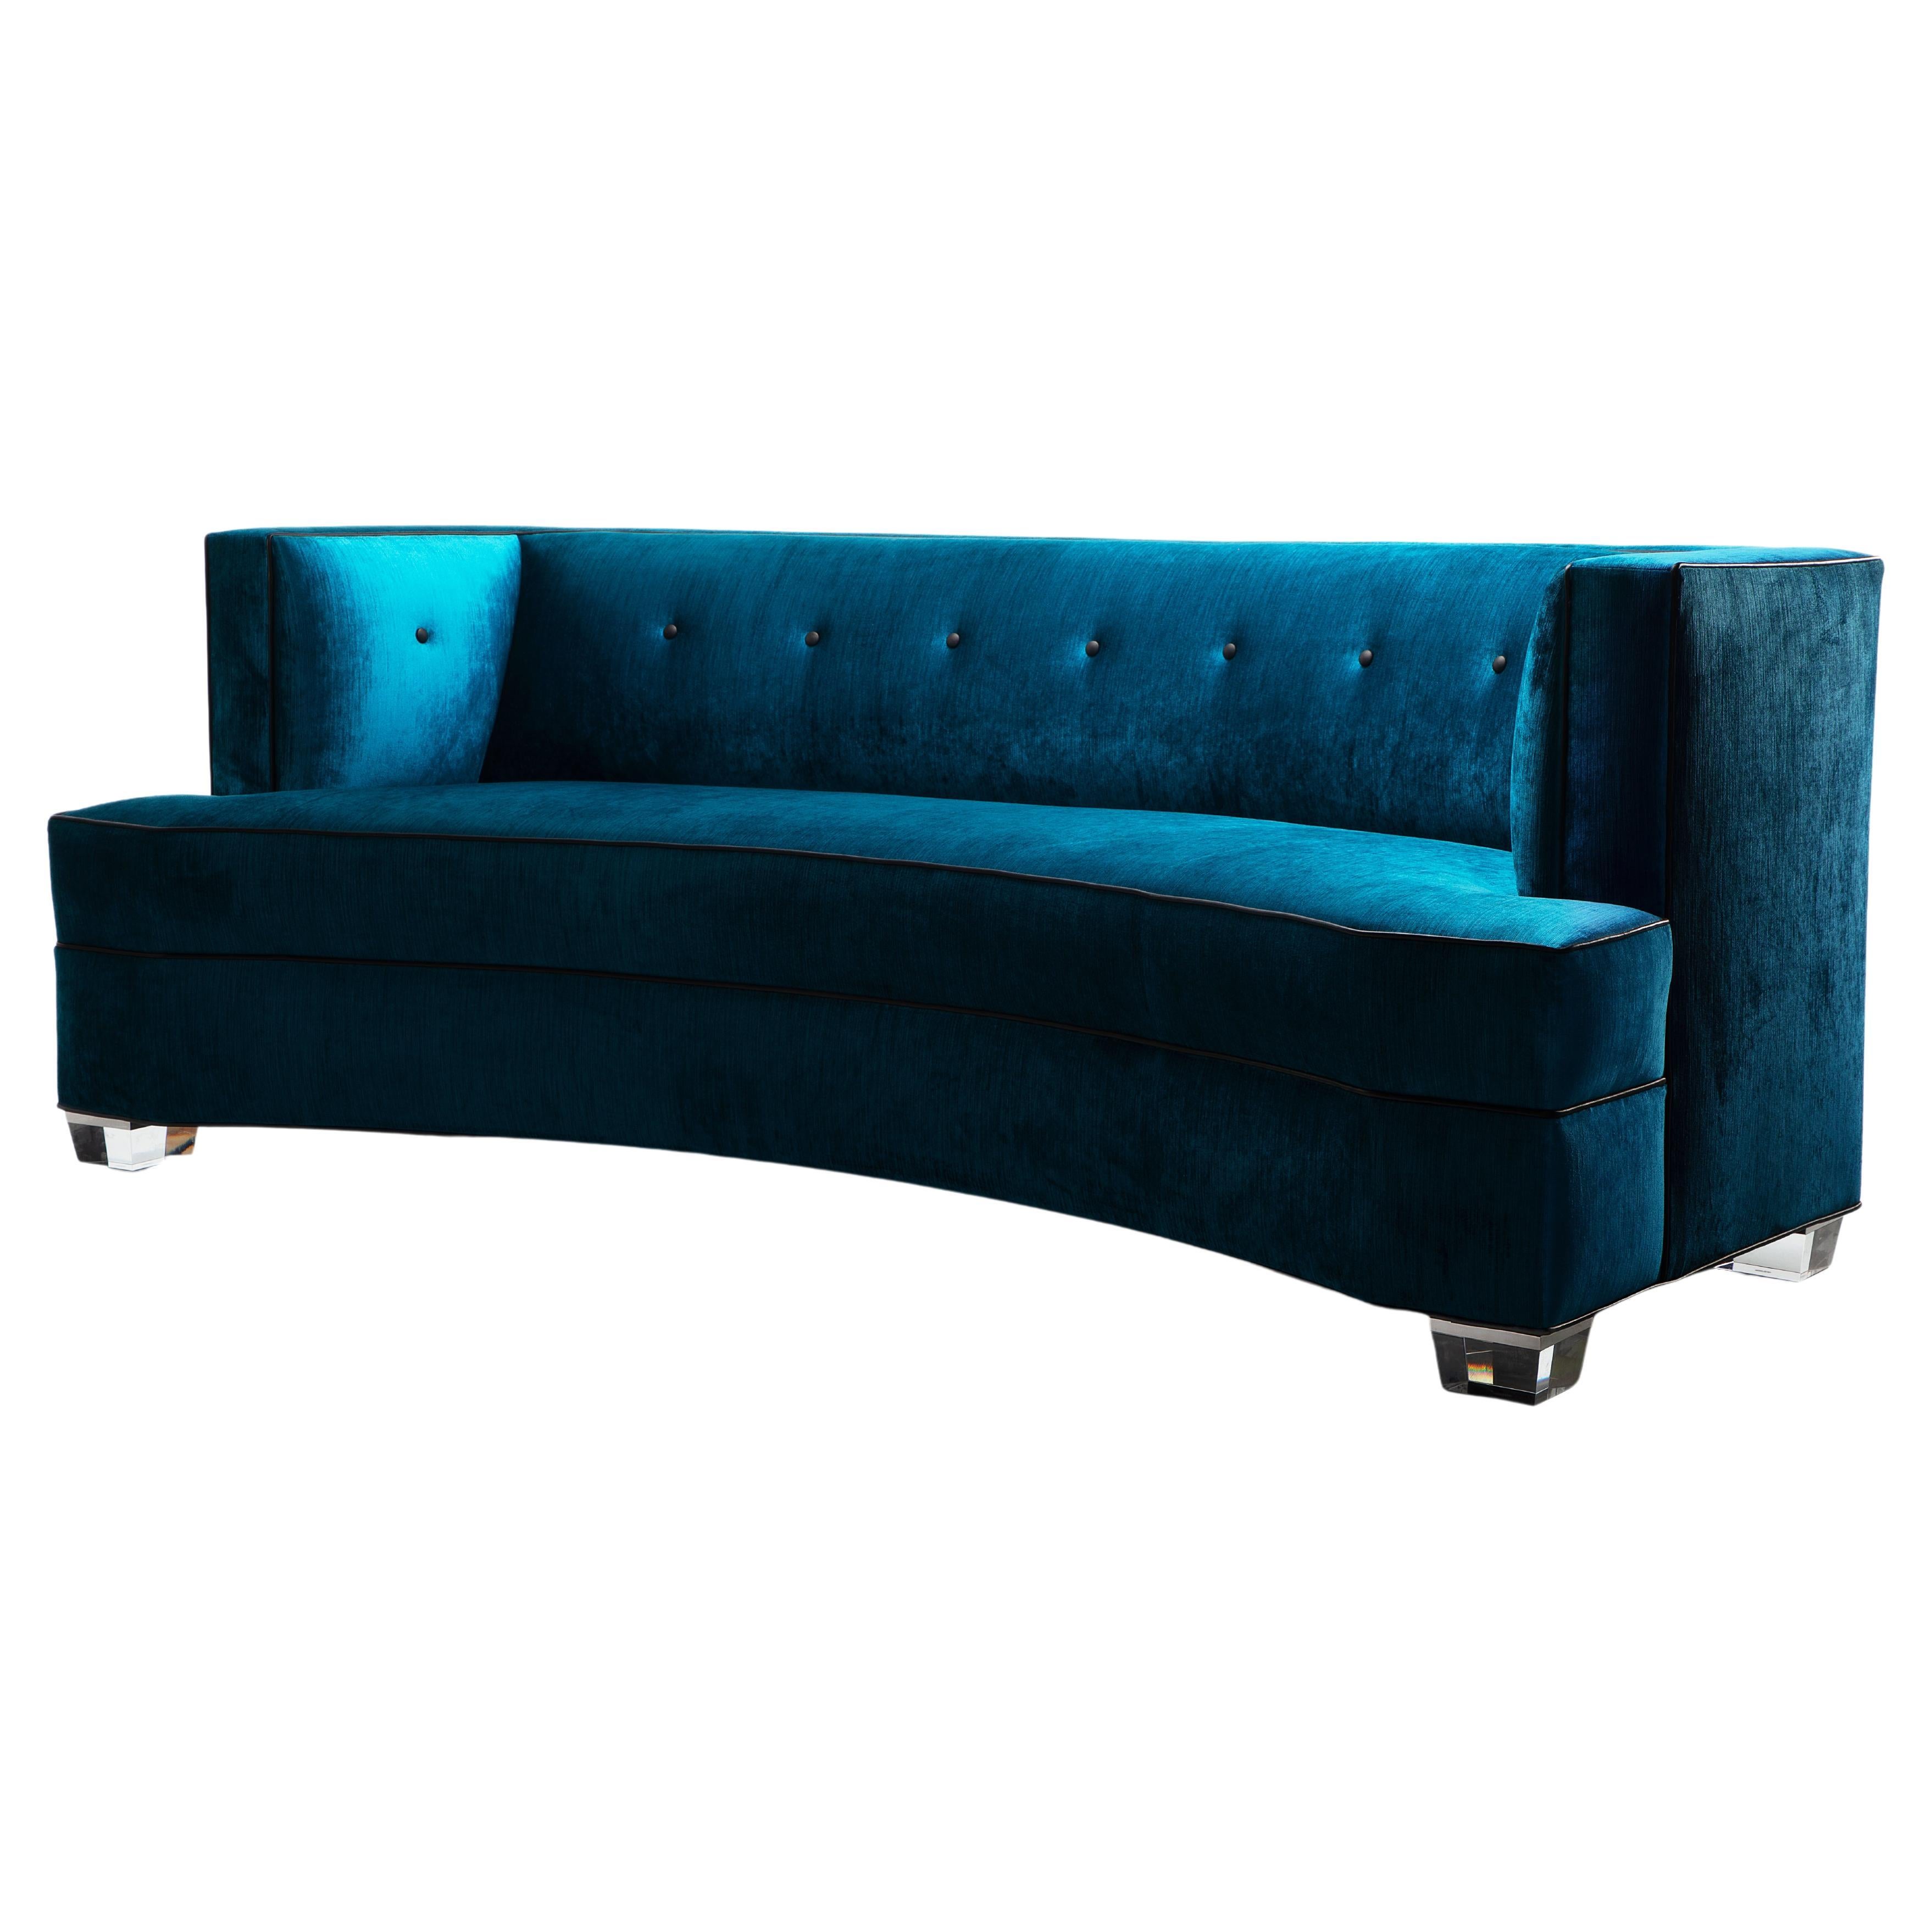 Presenting Gabriella, a shapely sofa with finishes fit for royalty. Whether covered in a rich velvet, wool or mohair, her rounded body and sleek button detail command the room with her presence. A committed soul, she is at her best when cozied up